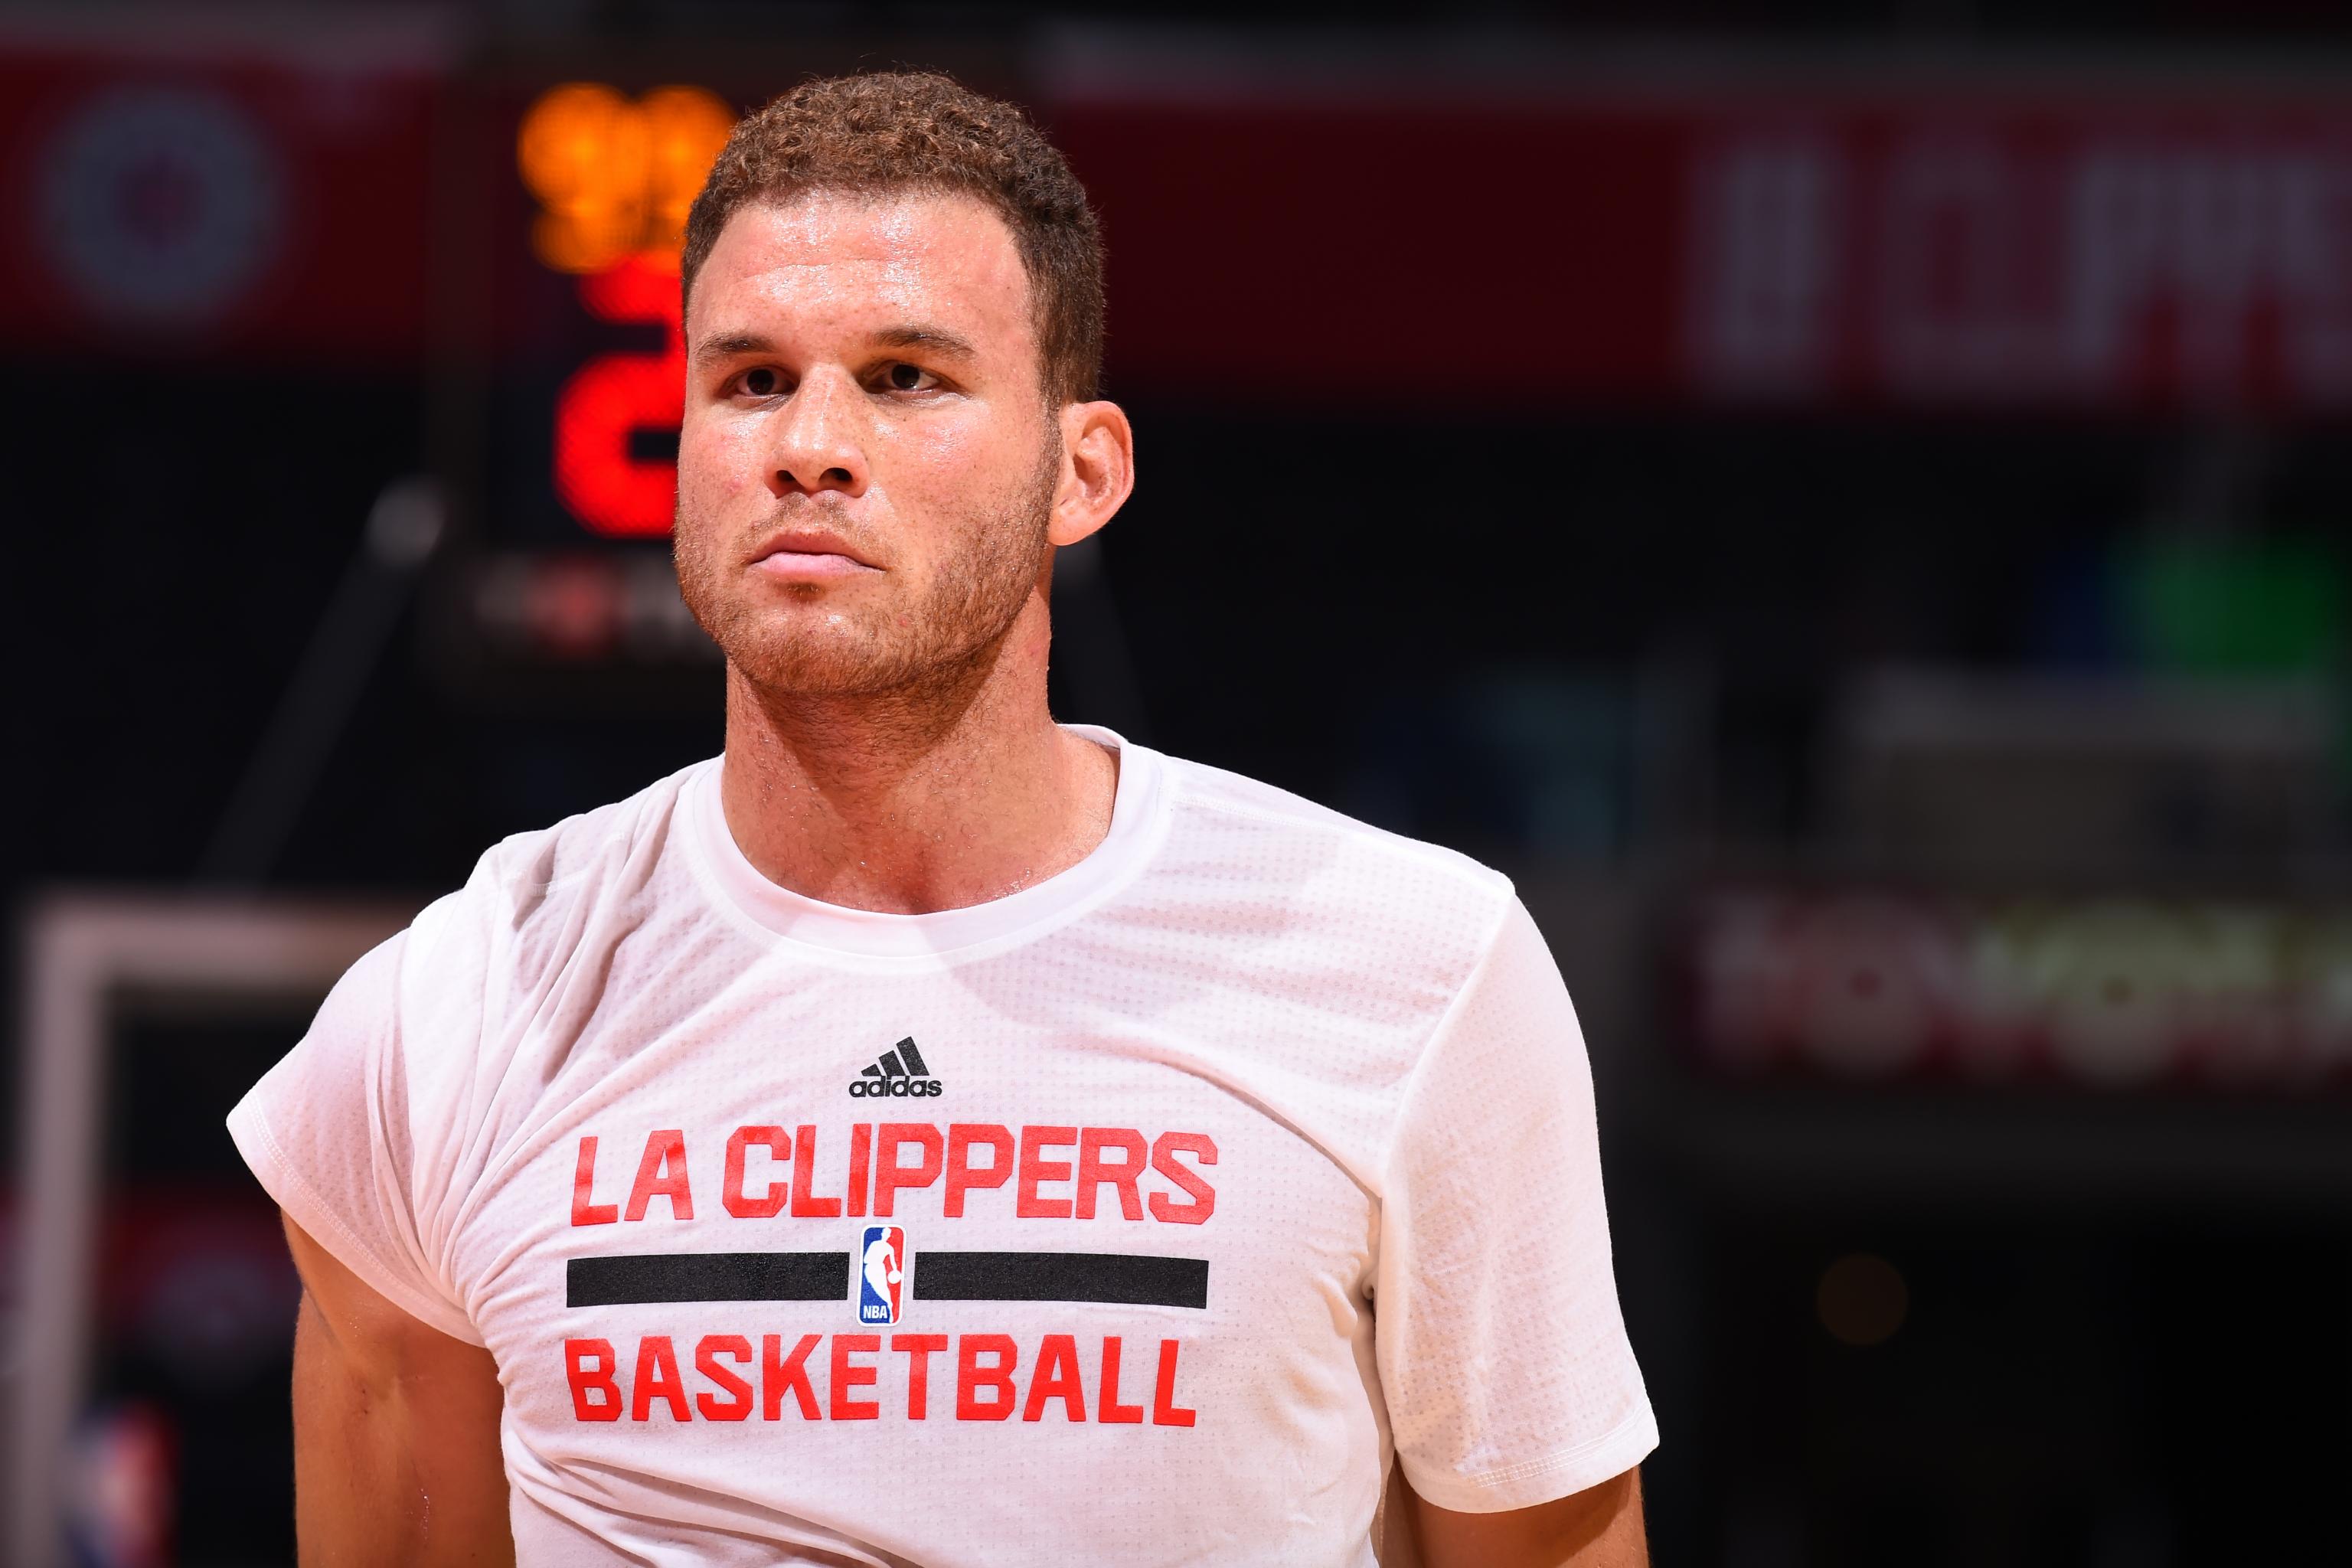 Let Blake Griffin Show You How To Look Great in Your 20s